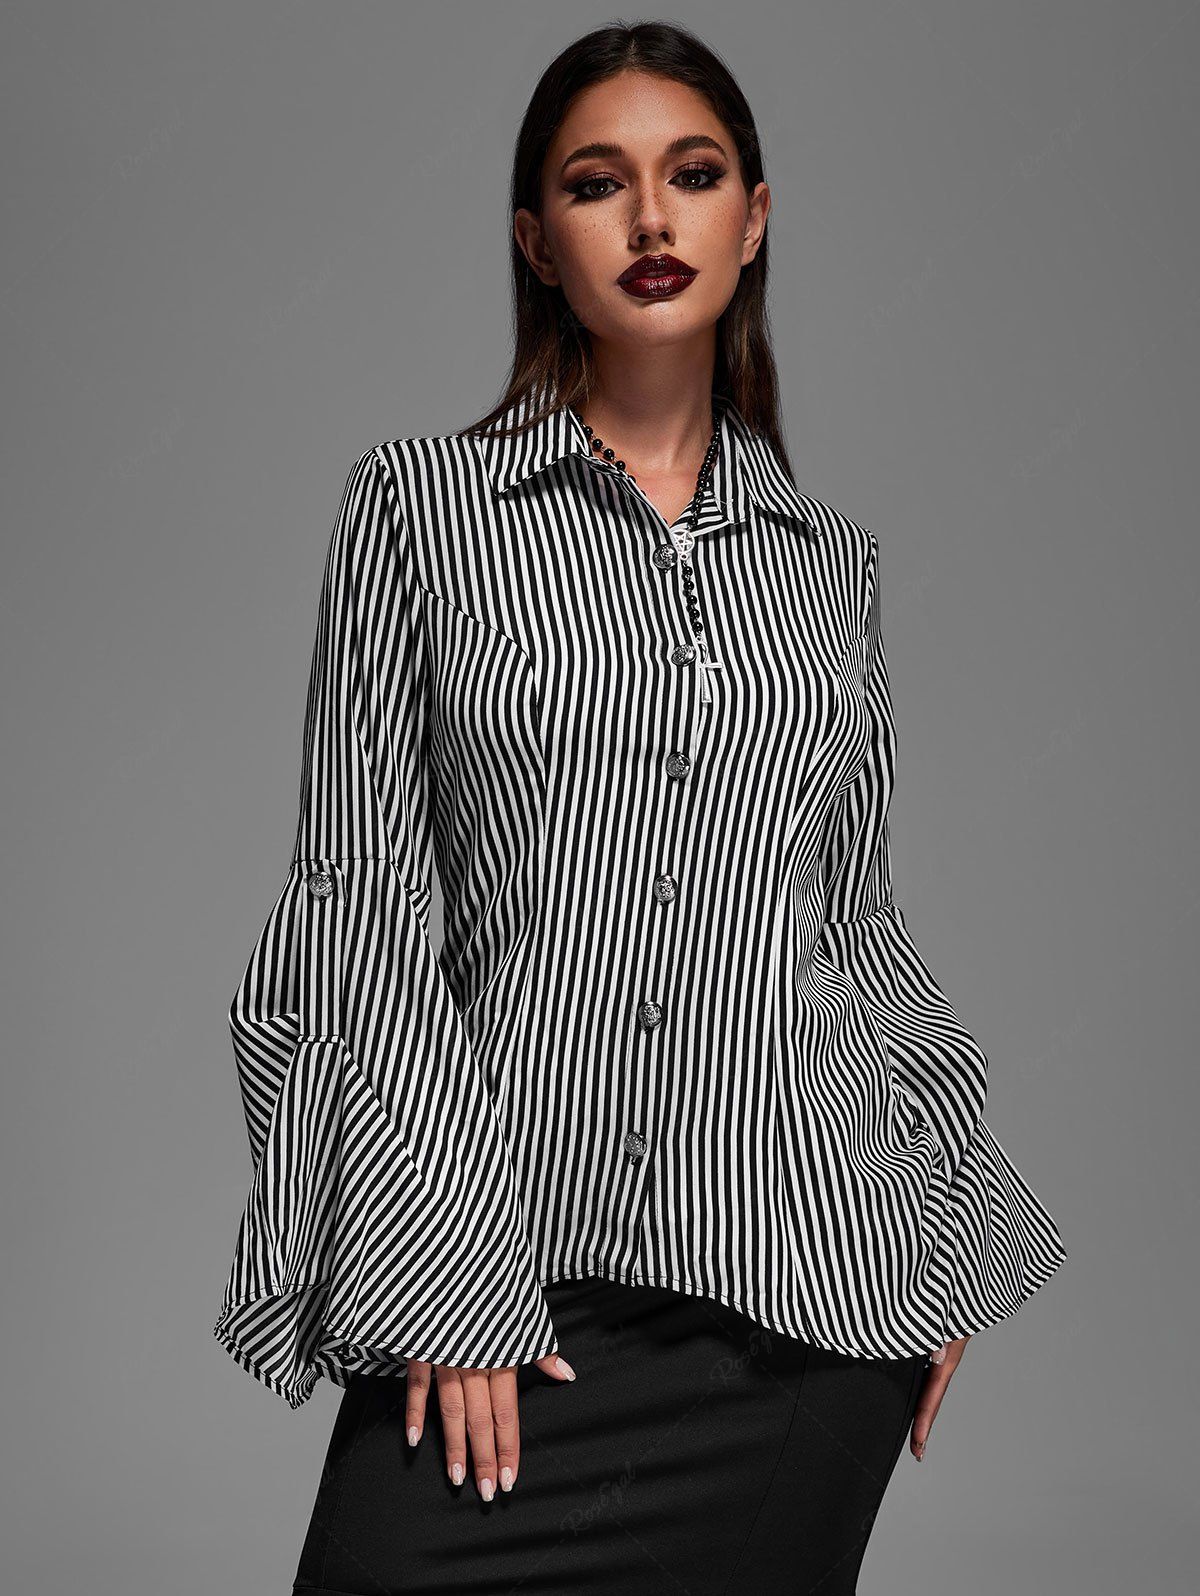 💗Lauren Loves💗Gothic Button Striped Back Ruched Lace Up Flare Sleeves Shirt